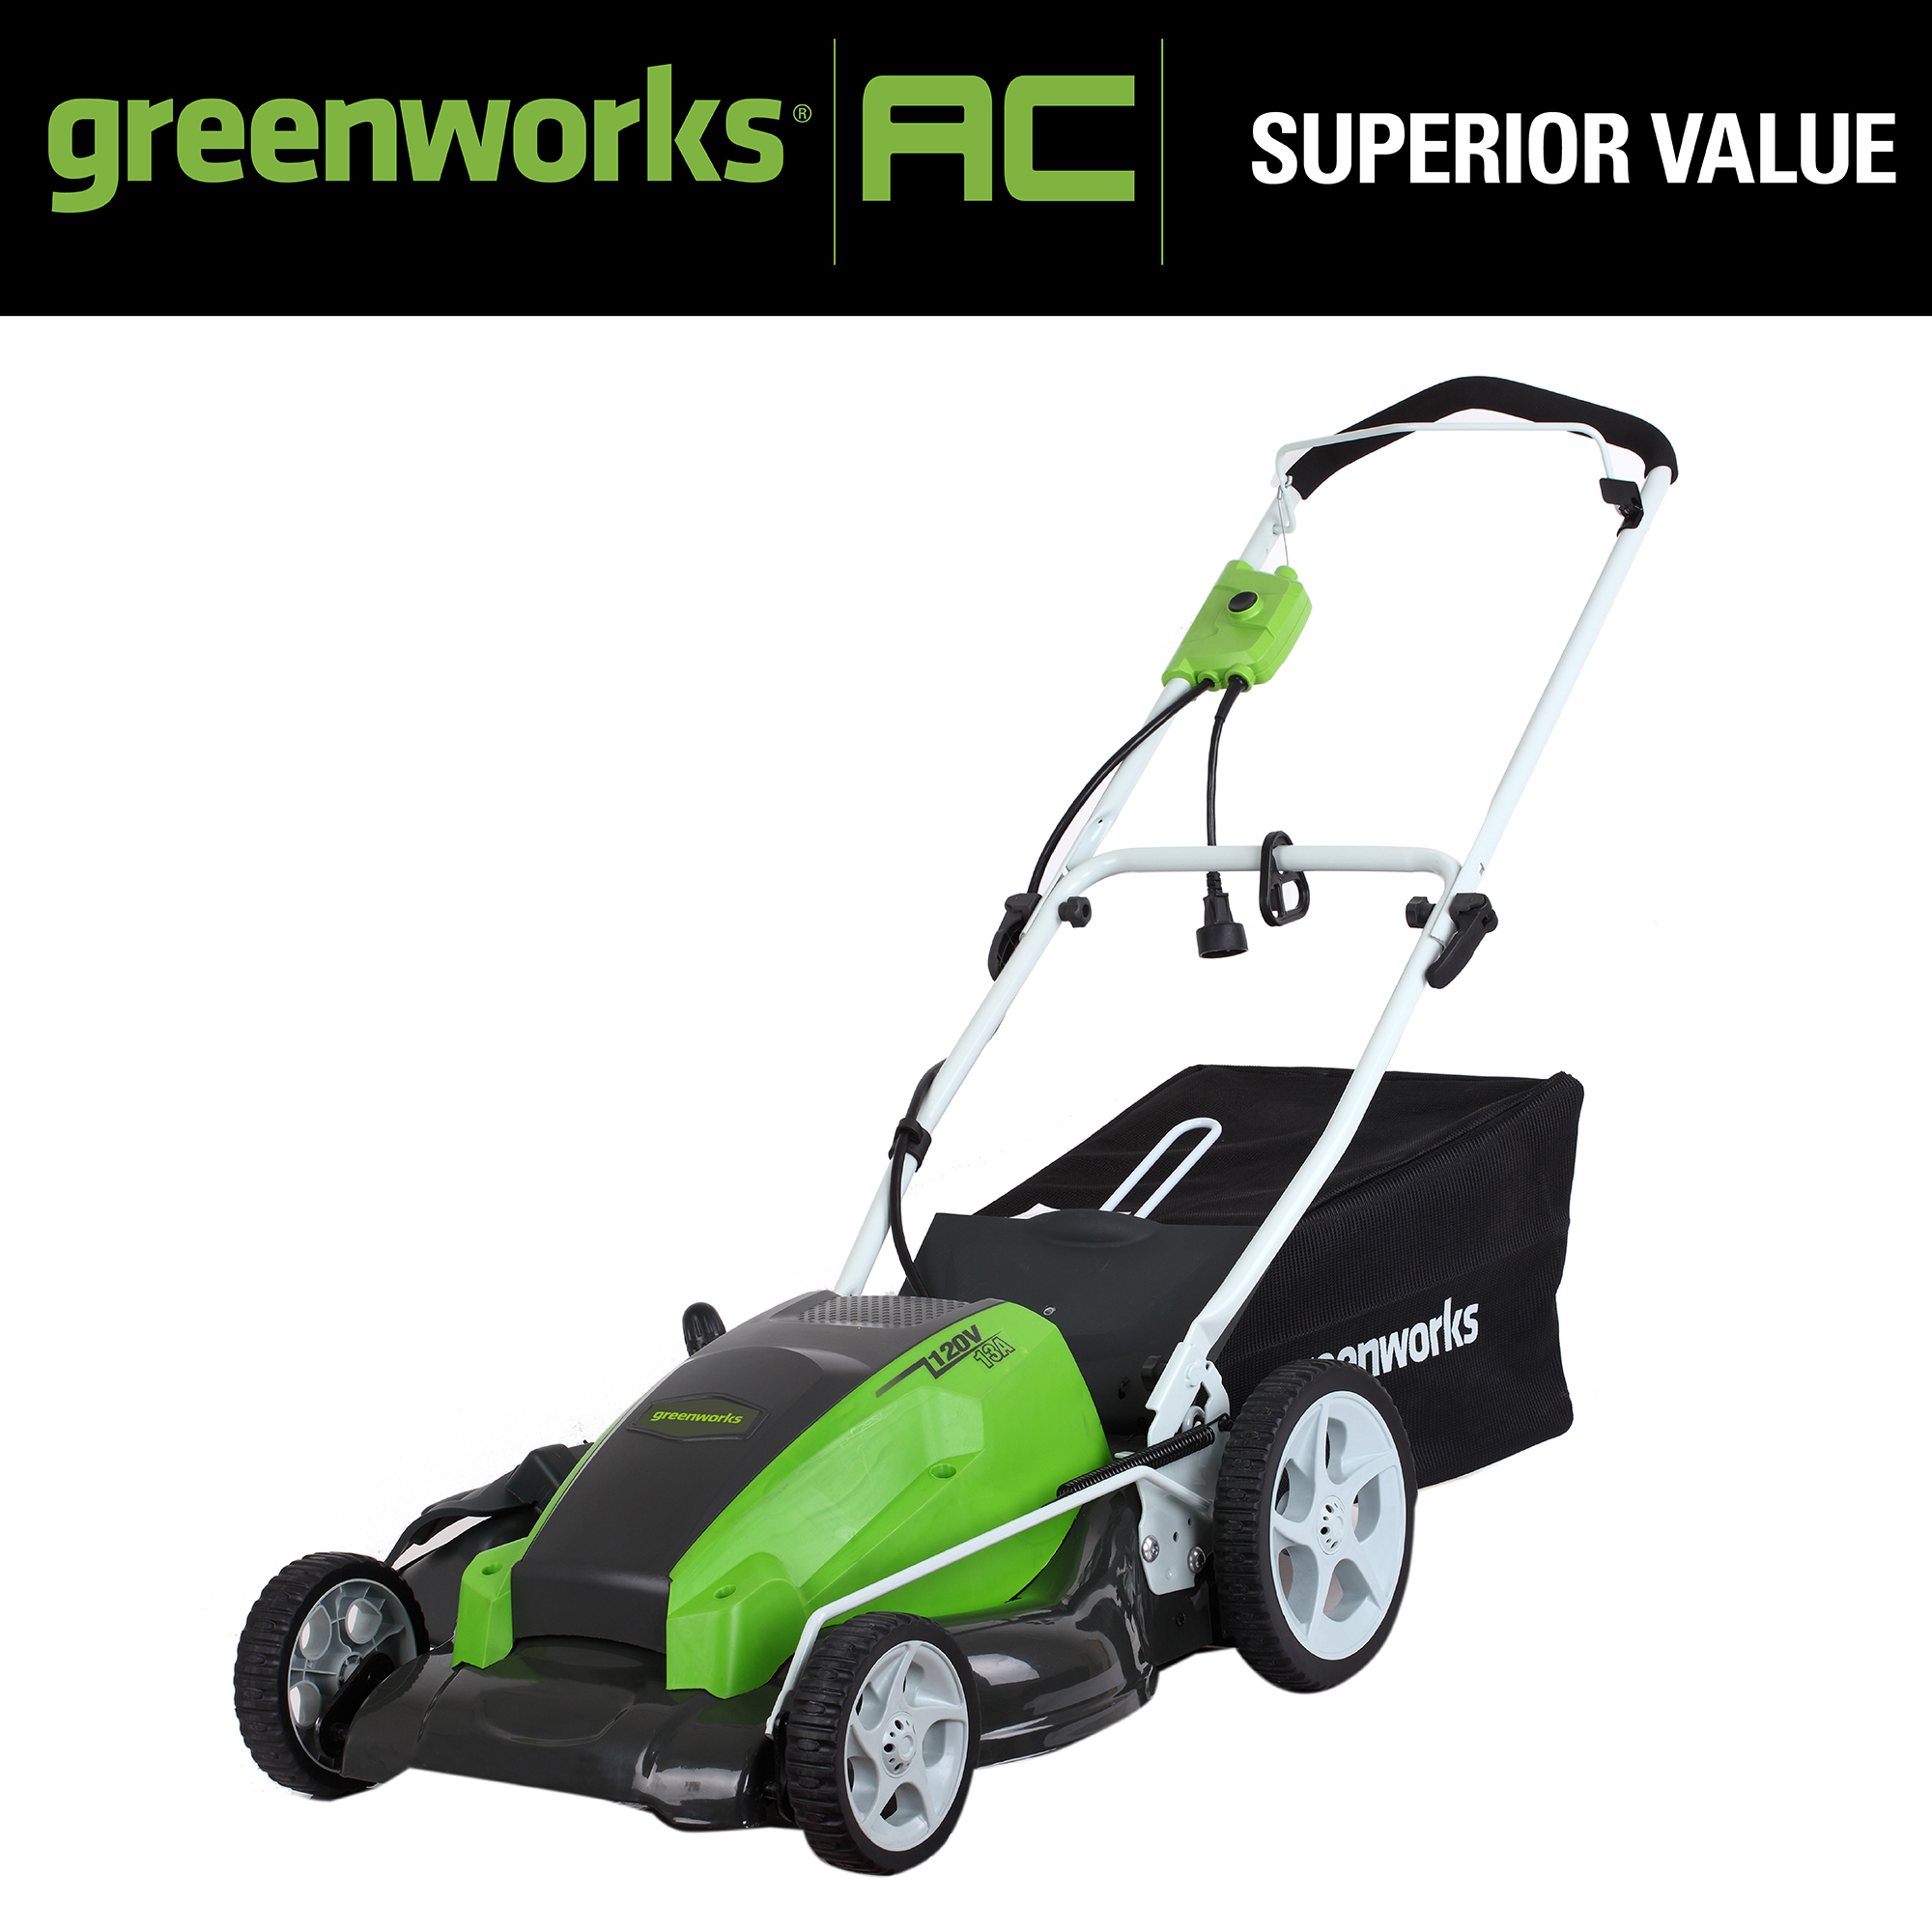 Greenworks 13 Amp 21" Corded Electric Walk-Behind Push Lawn Mower 25112 - image 3 of 12